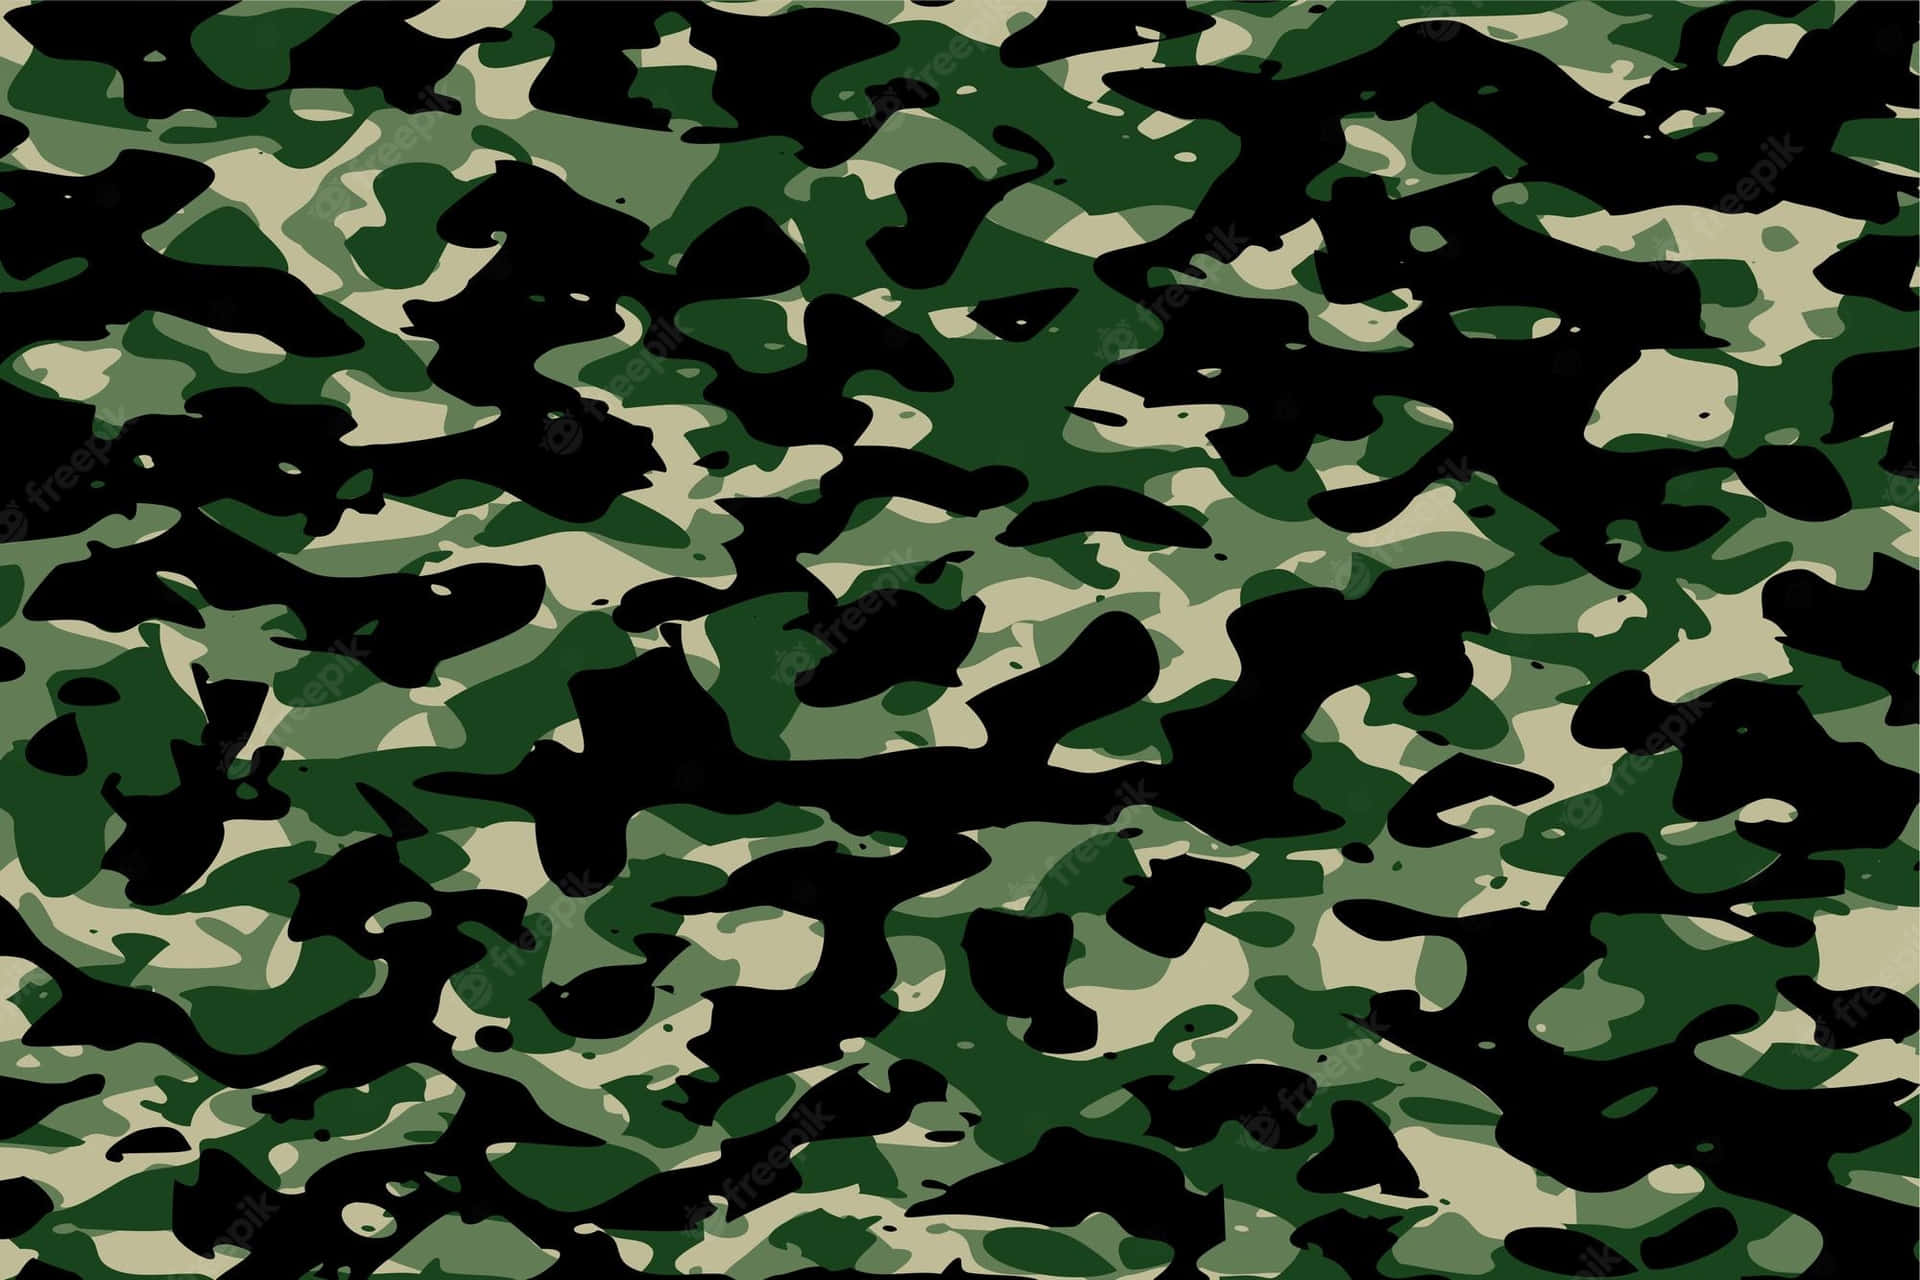 Show your camo loving side with this stylish wall art Wallpaper